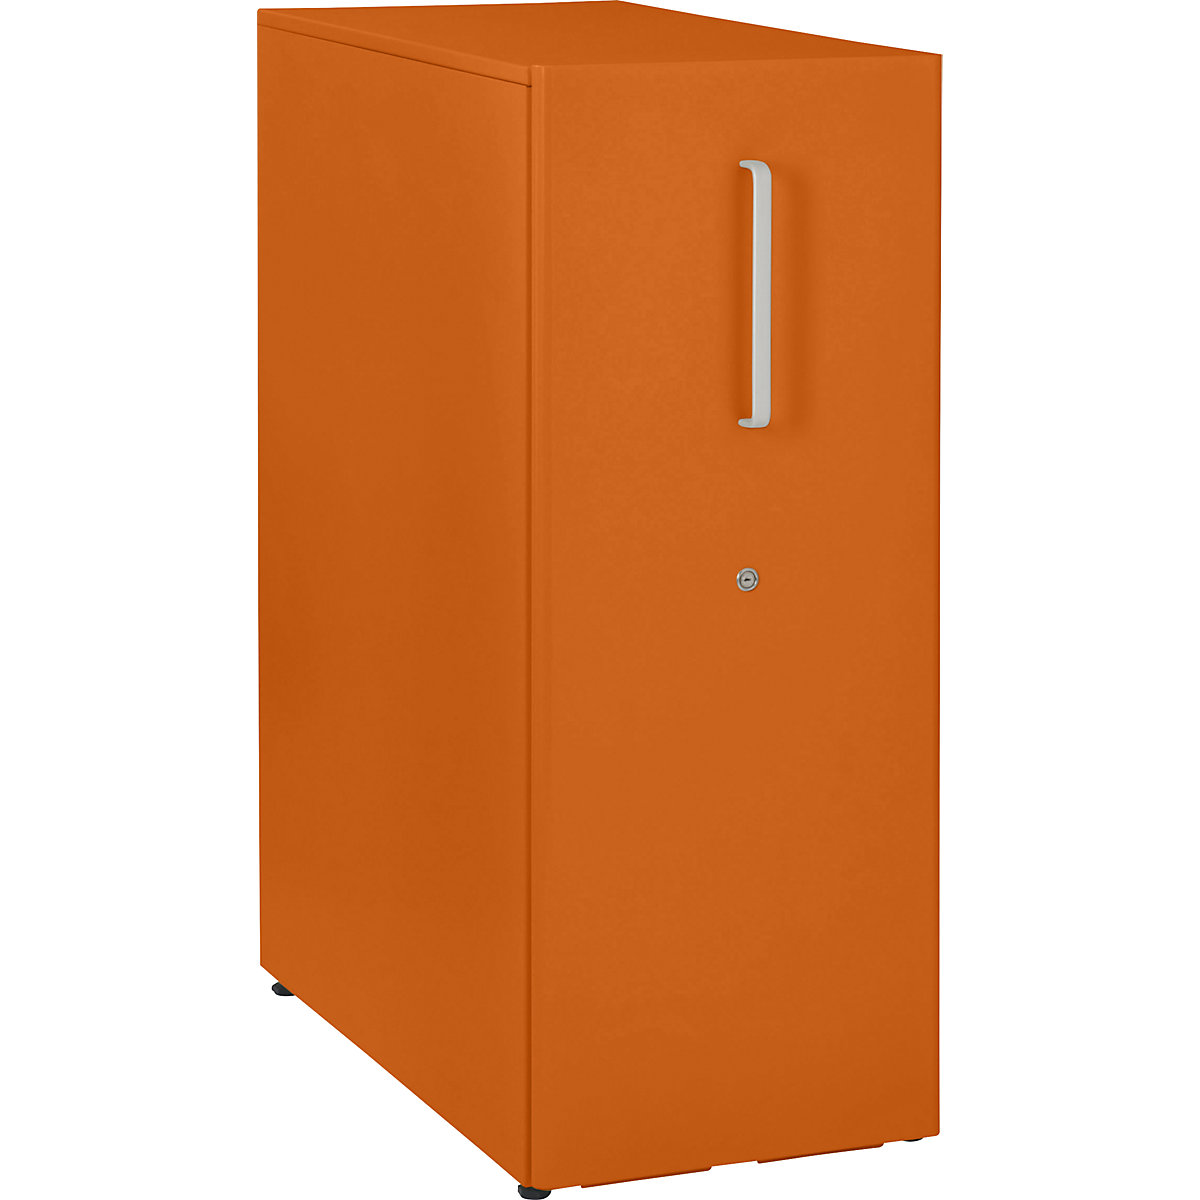 Tower™ 3 add-on furniture, with worktop – BISLEY, for the left side, 3 shelves, orange-18